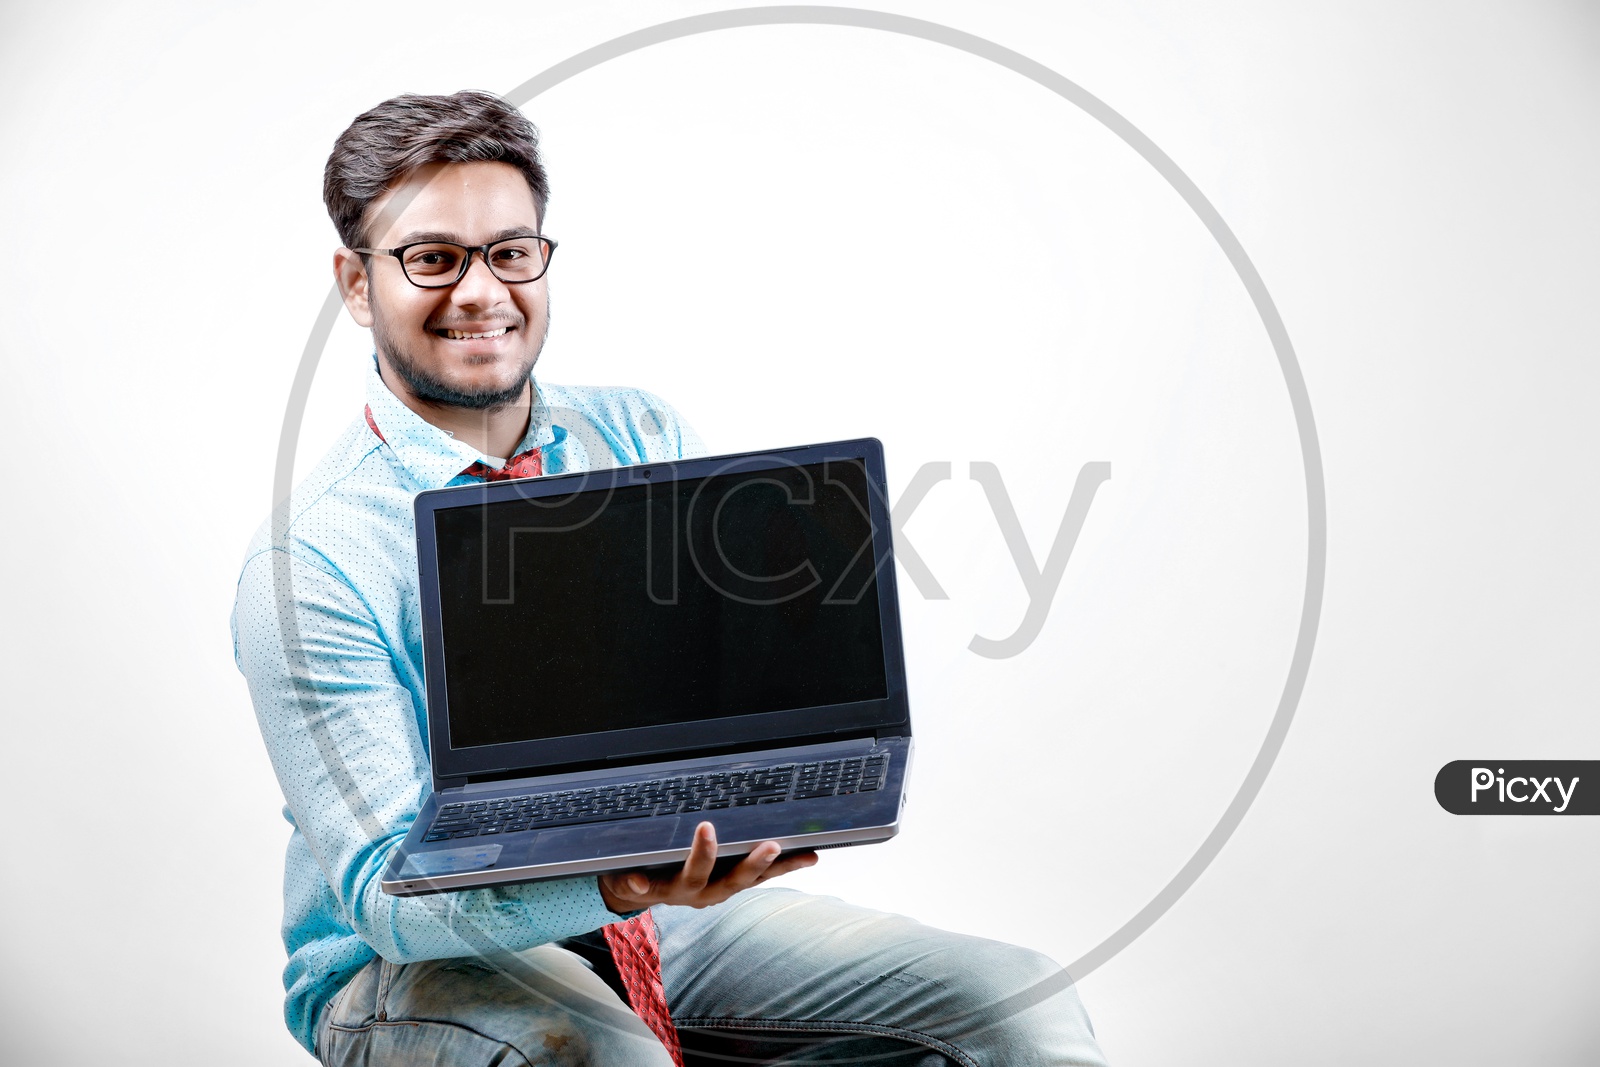 Young Indian Student/Businessman with Laptop